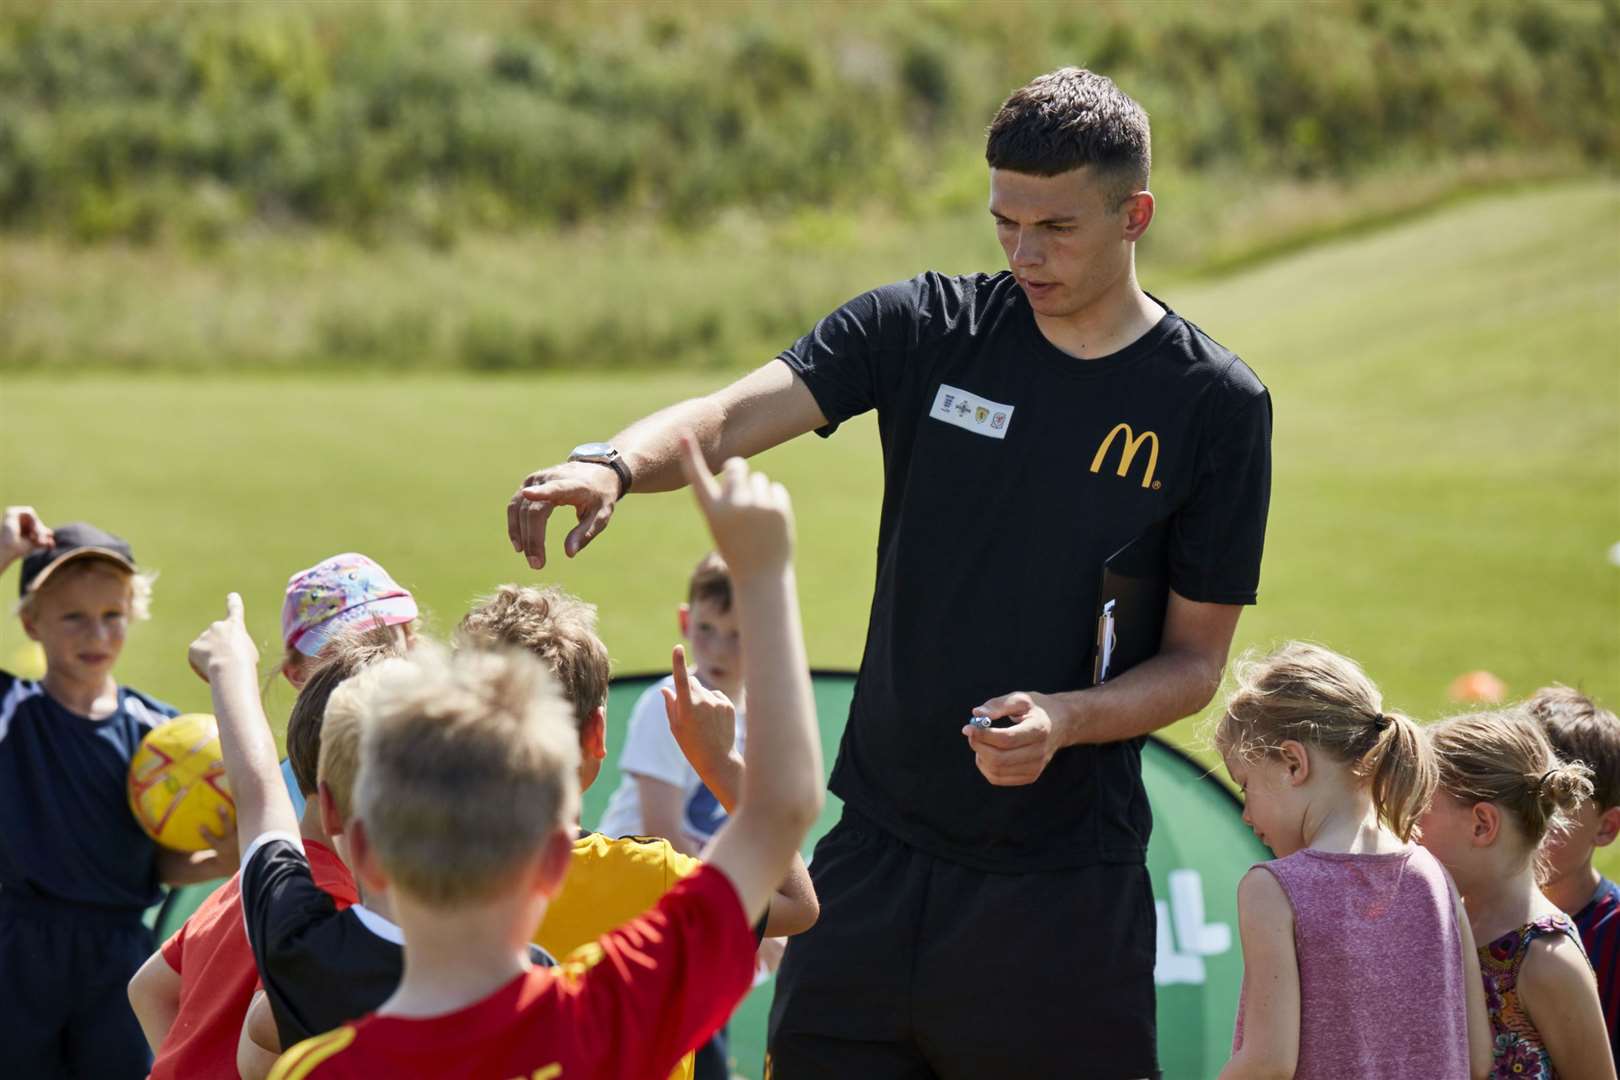 Free football sessions for children in Dartford have been running throughout April. Picture: McDonald's